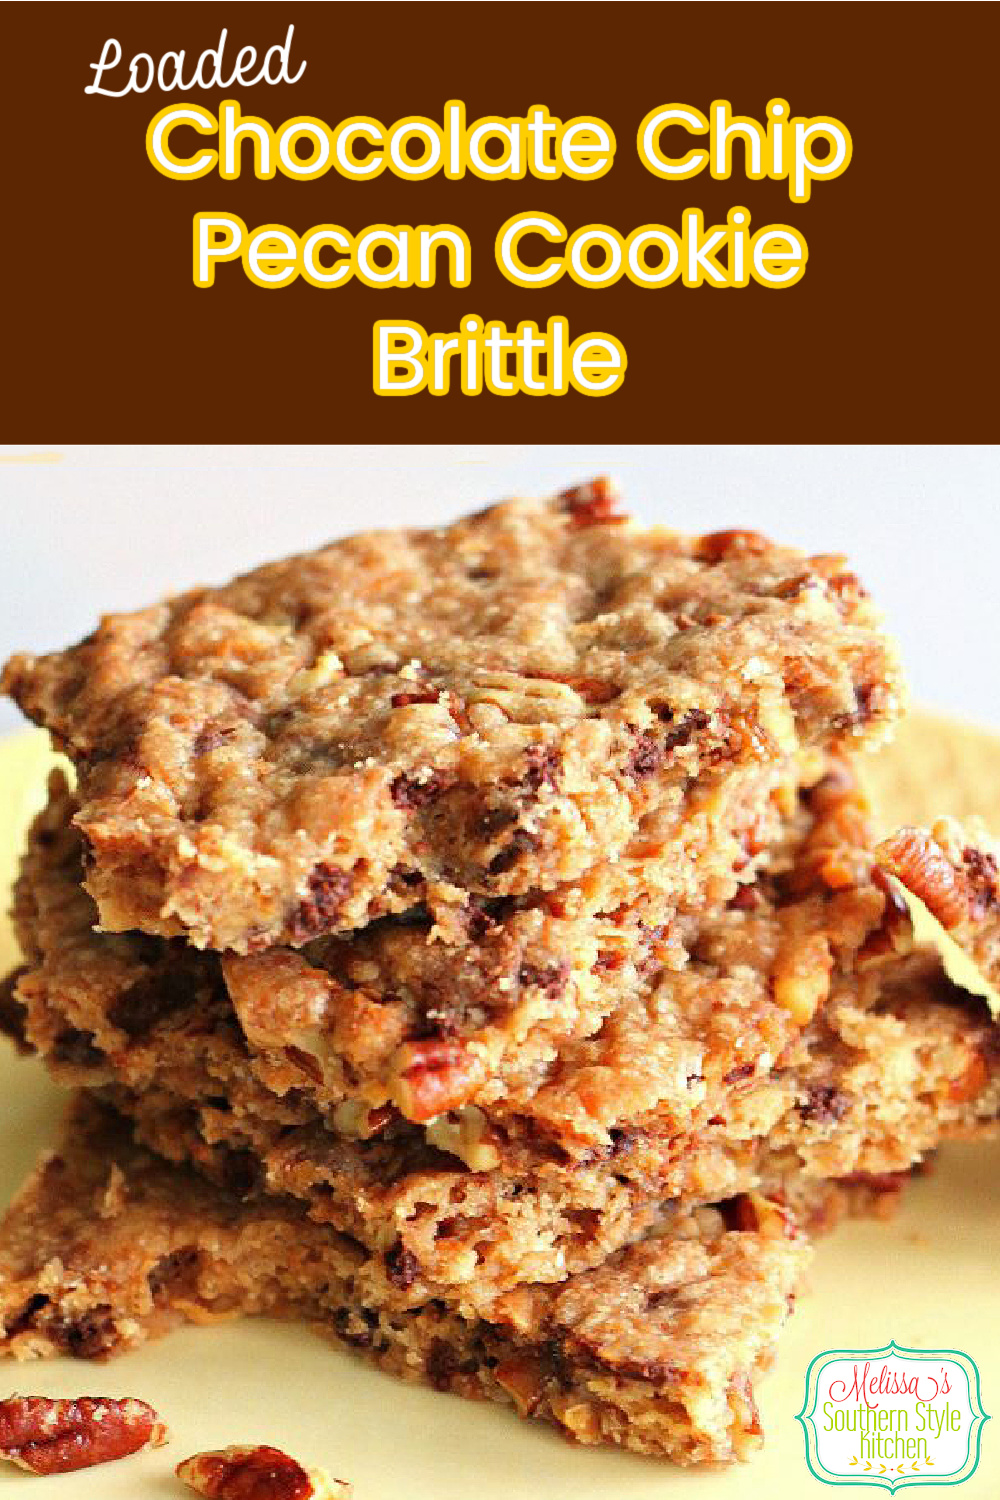 Loaded Chocolate Chip Pecan Cookie Brittle is easy to make and eat #cookiebrittle #chocolatechipscookies #pecancookies #desserts #holidaybaking #christmascookies #dessertfoodrecipes #southernfood #southernrecipes